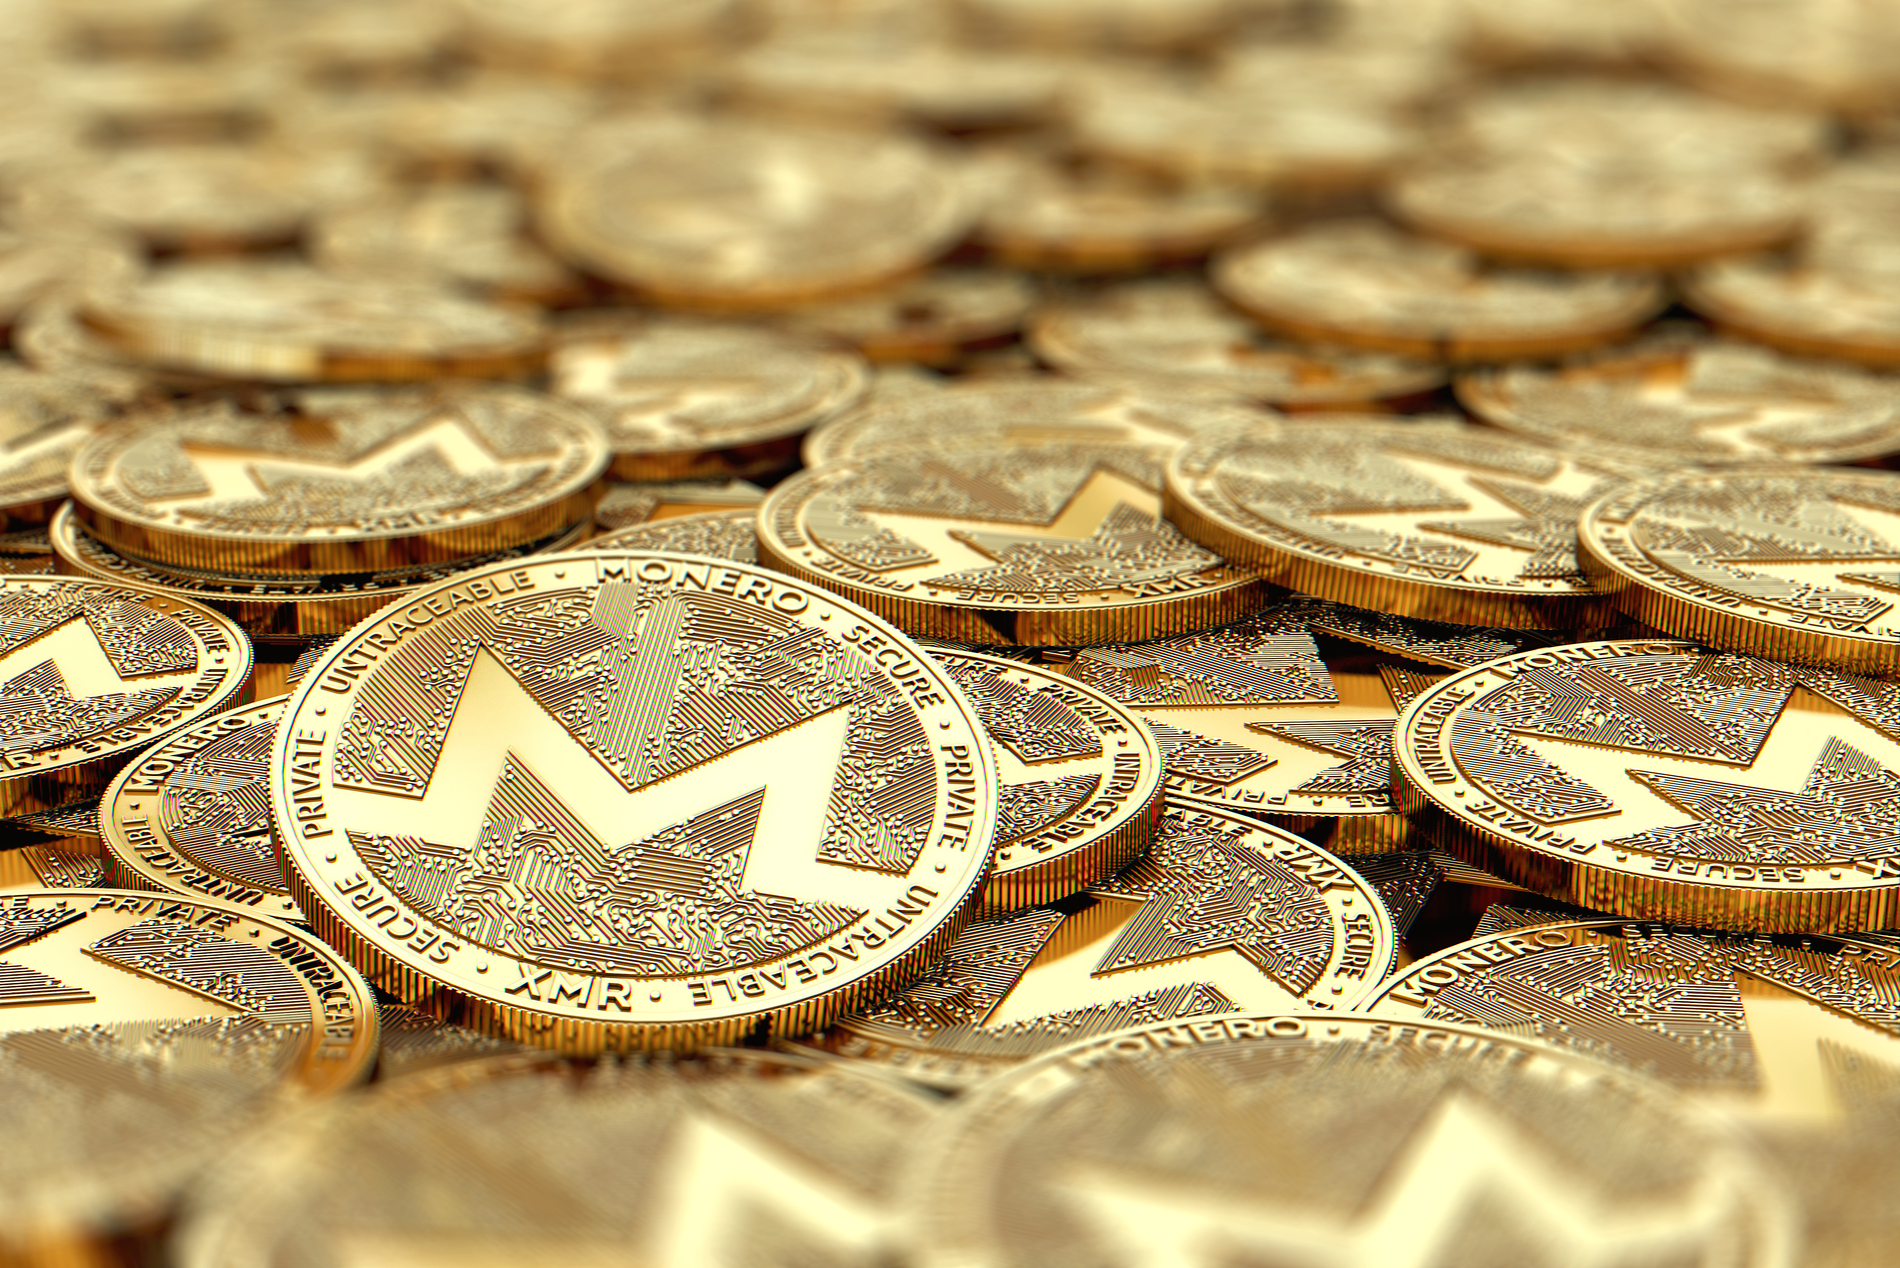 Crypto Mining Malware Has Netted Nearly 5% Of All Monero, Says Research